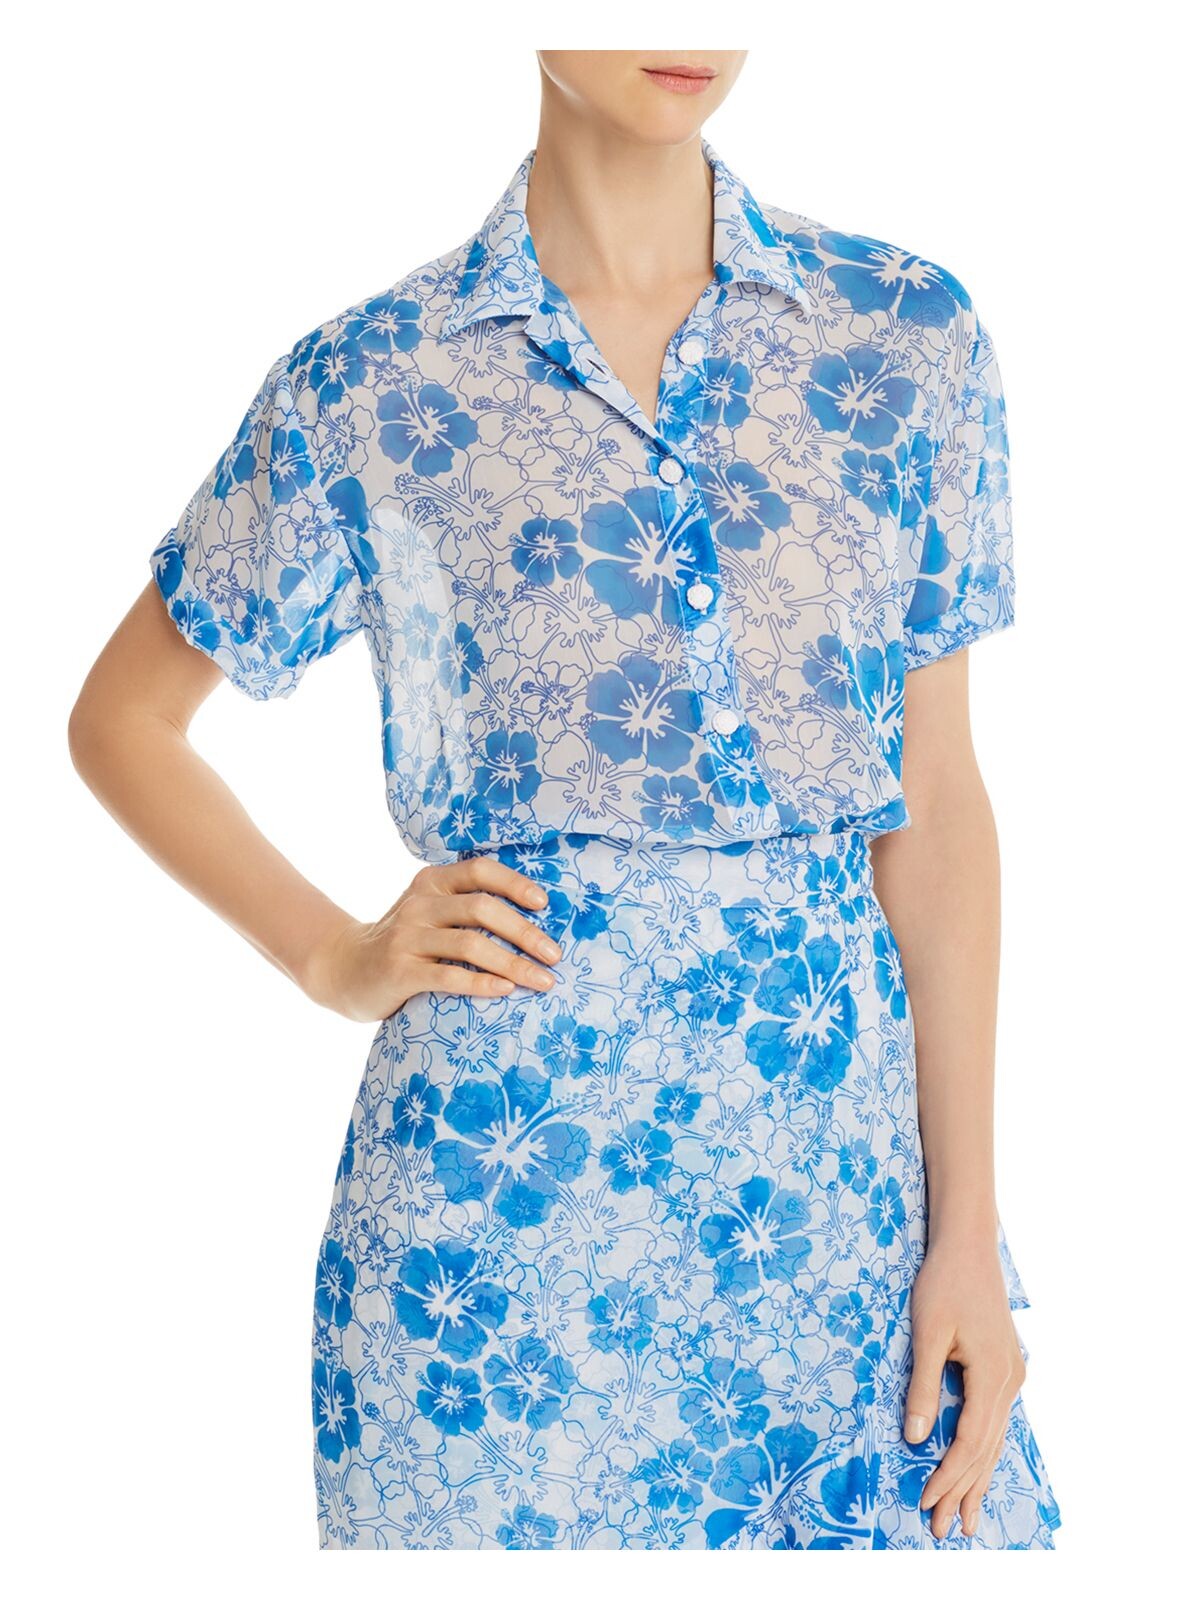 Mochi Womens Blue Floral Short Sleeve Collared Top XS